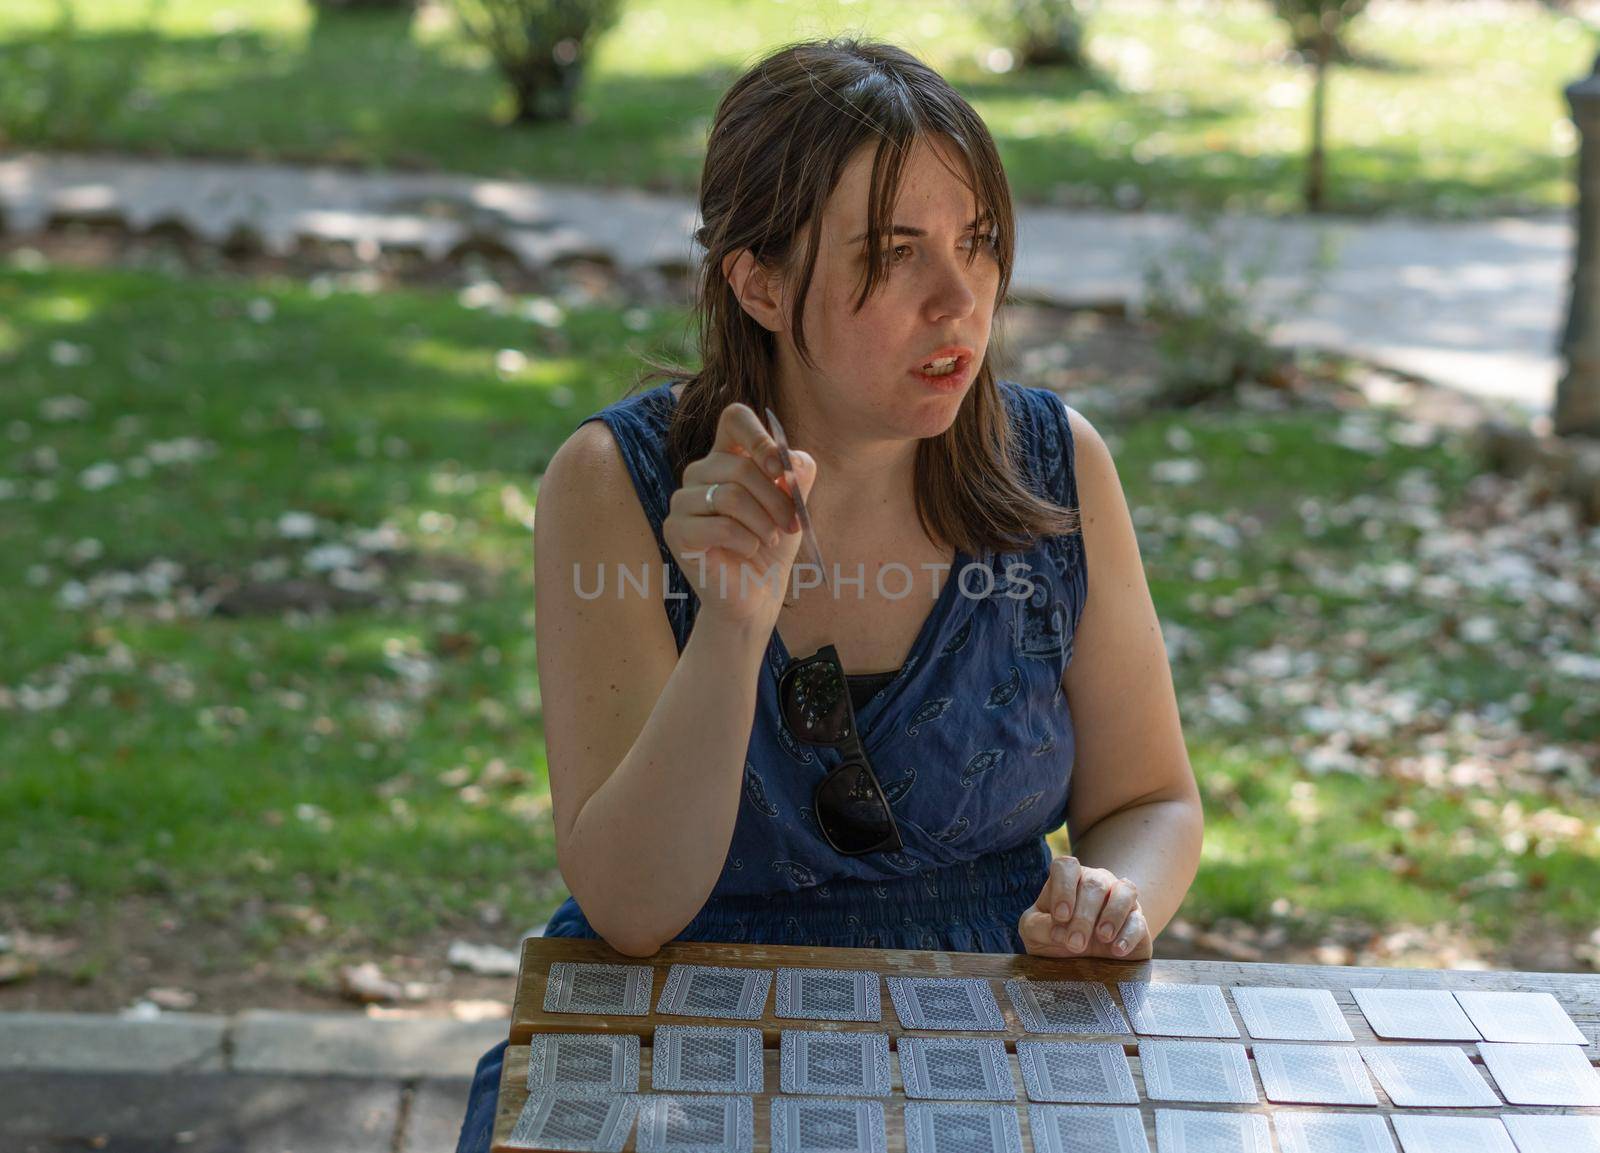 young woman playing cards in the park on a sunny day wearing a blue dress